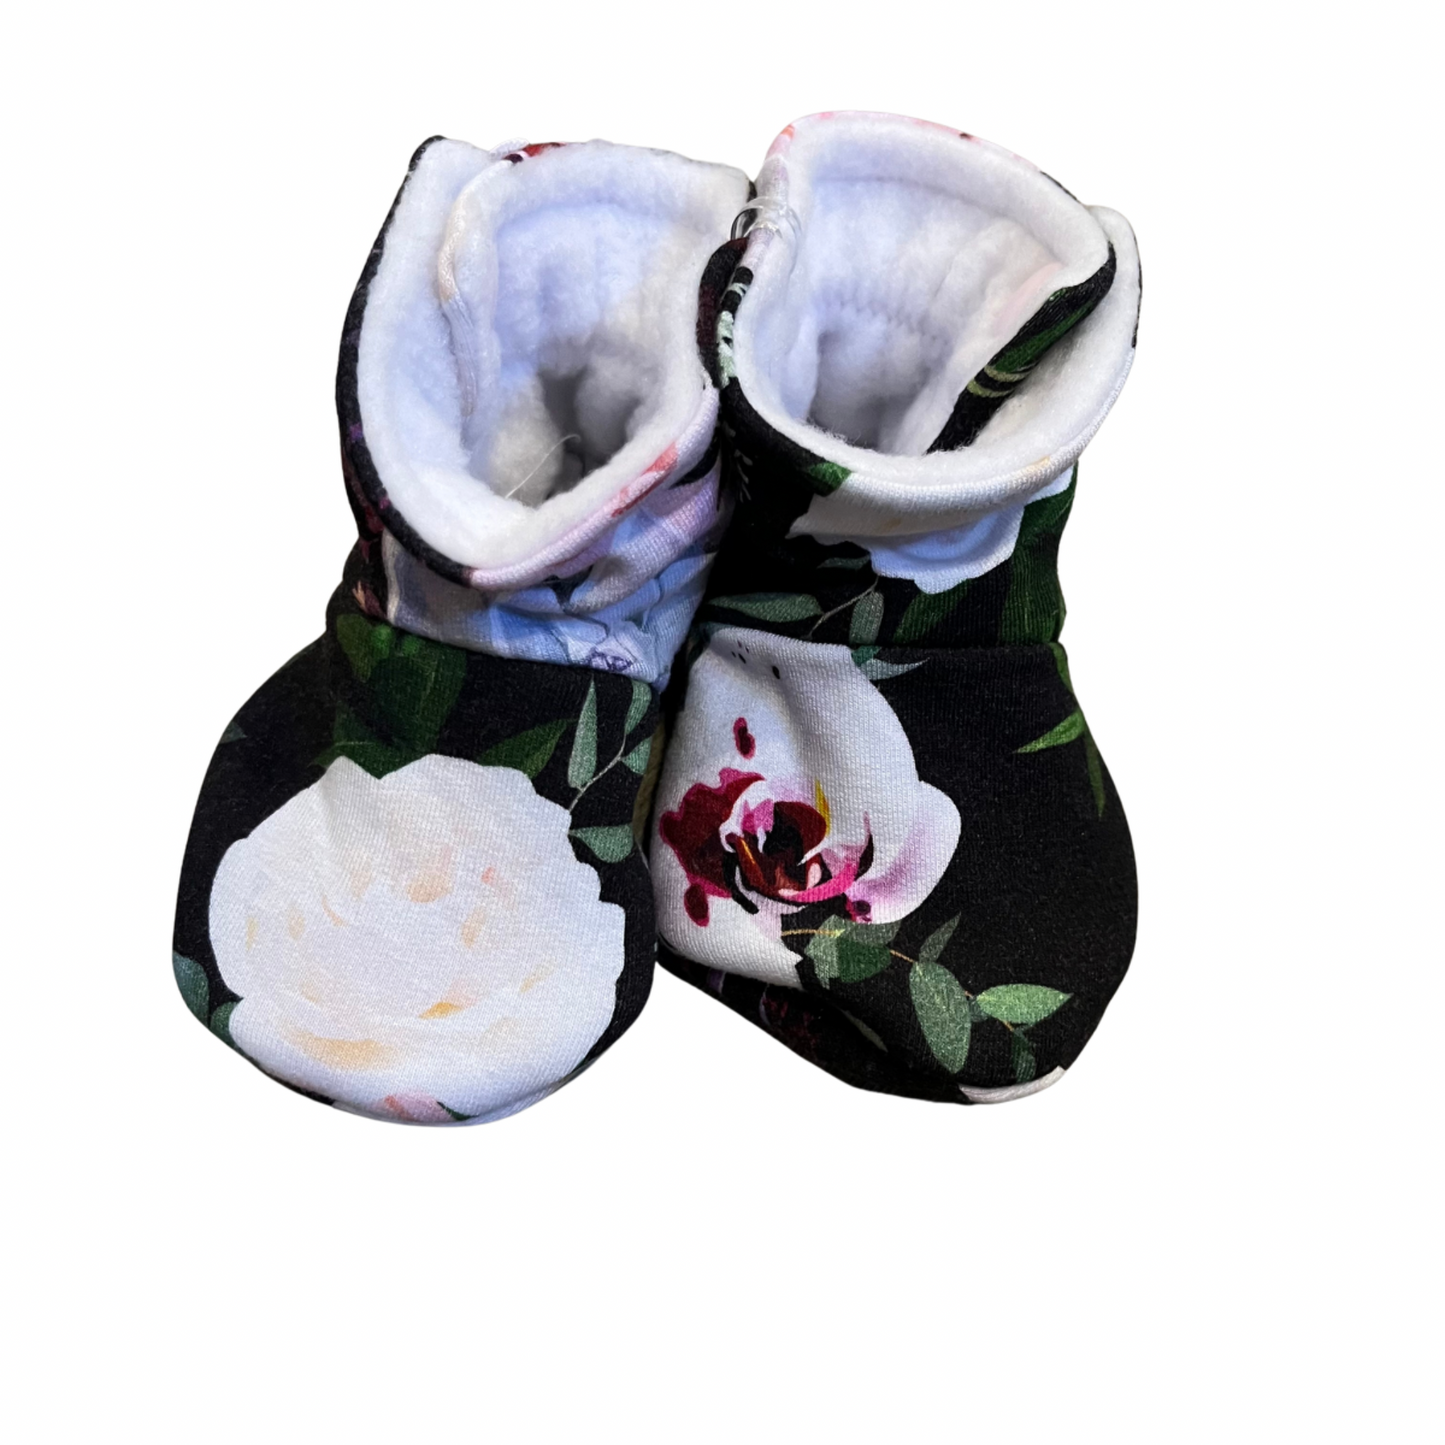 Stay on Booties - Newborn Size